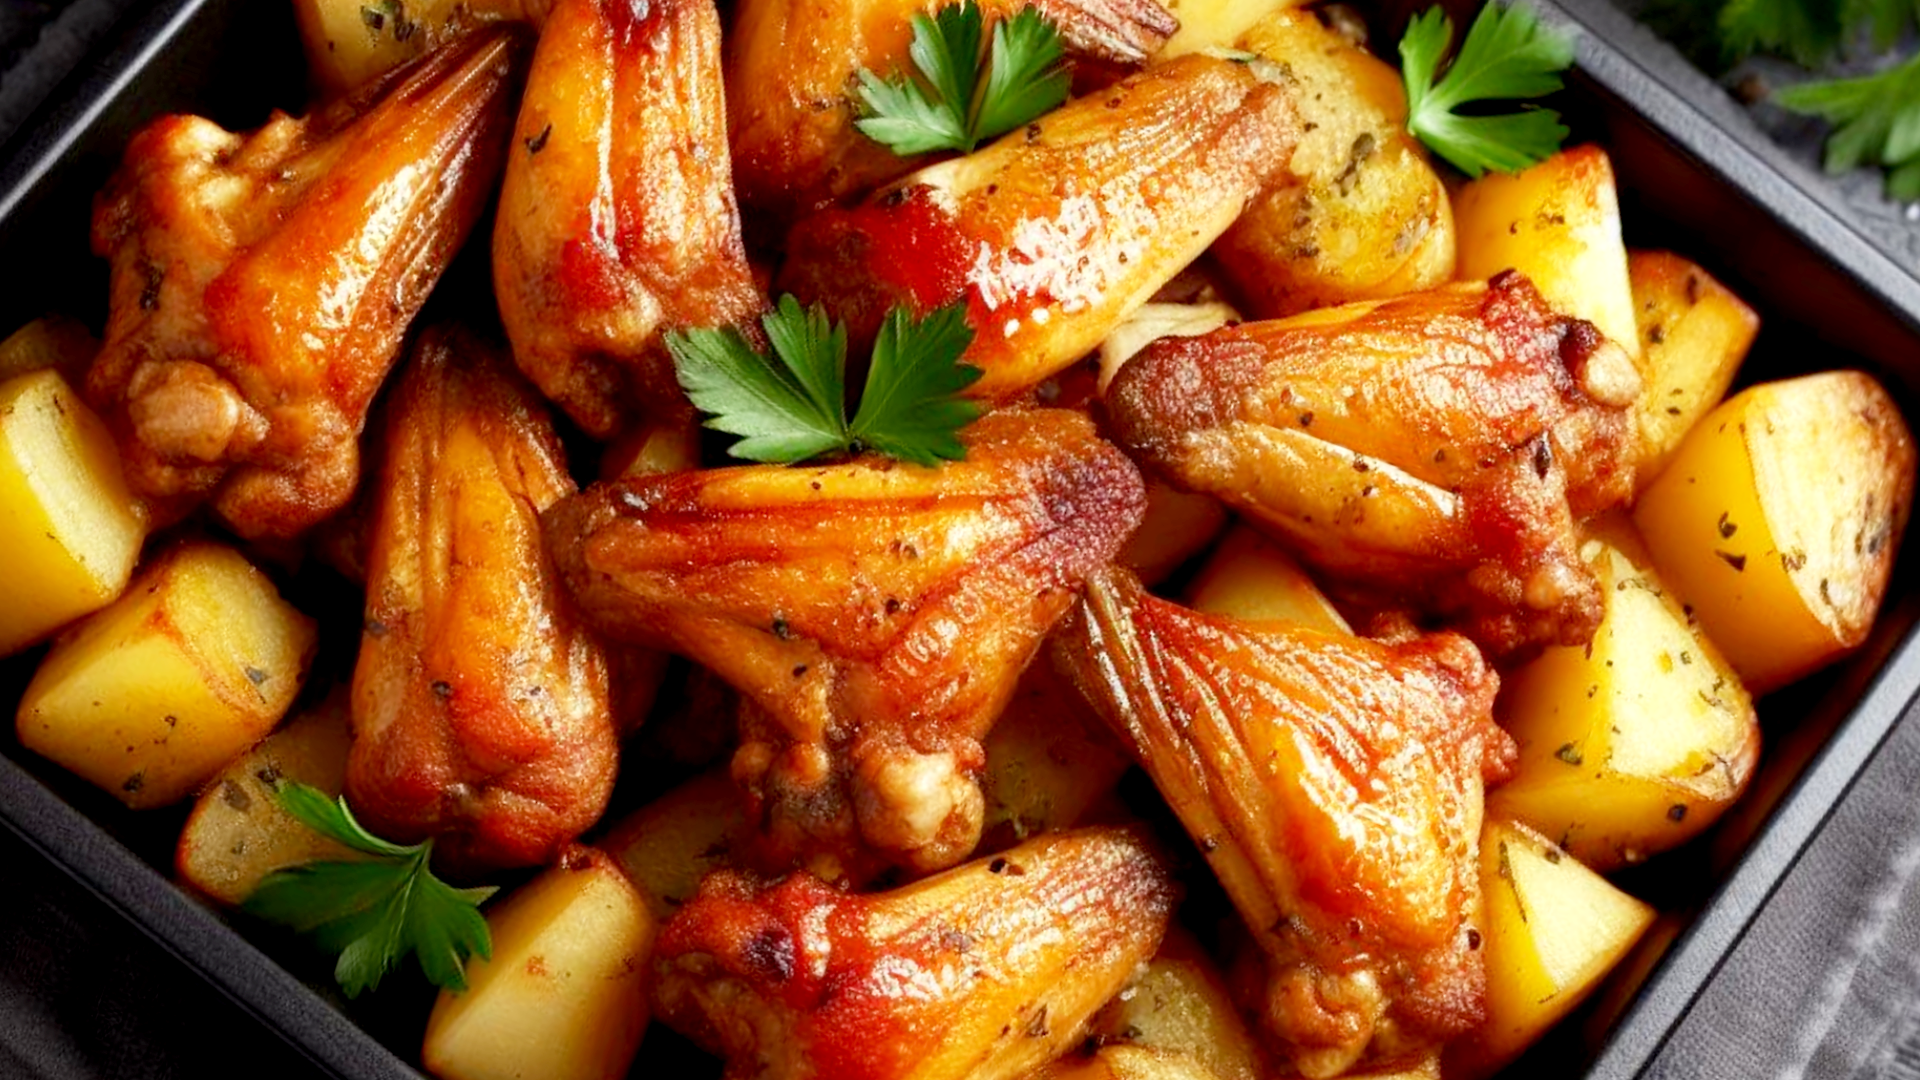 Oven-Baked Chicken Wings with Potatoes Recipe 4.6 (16)